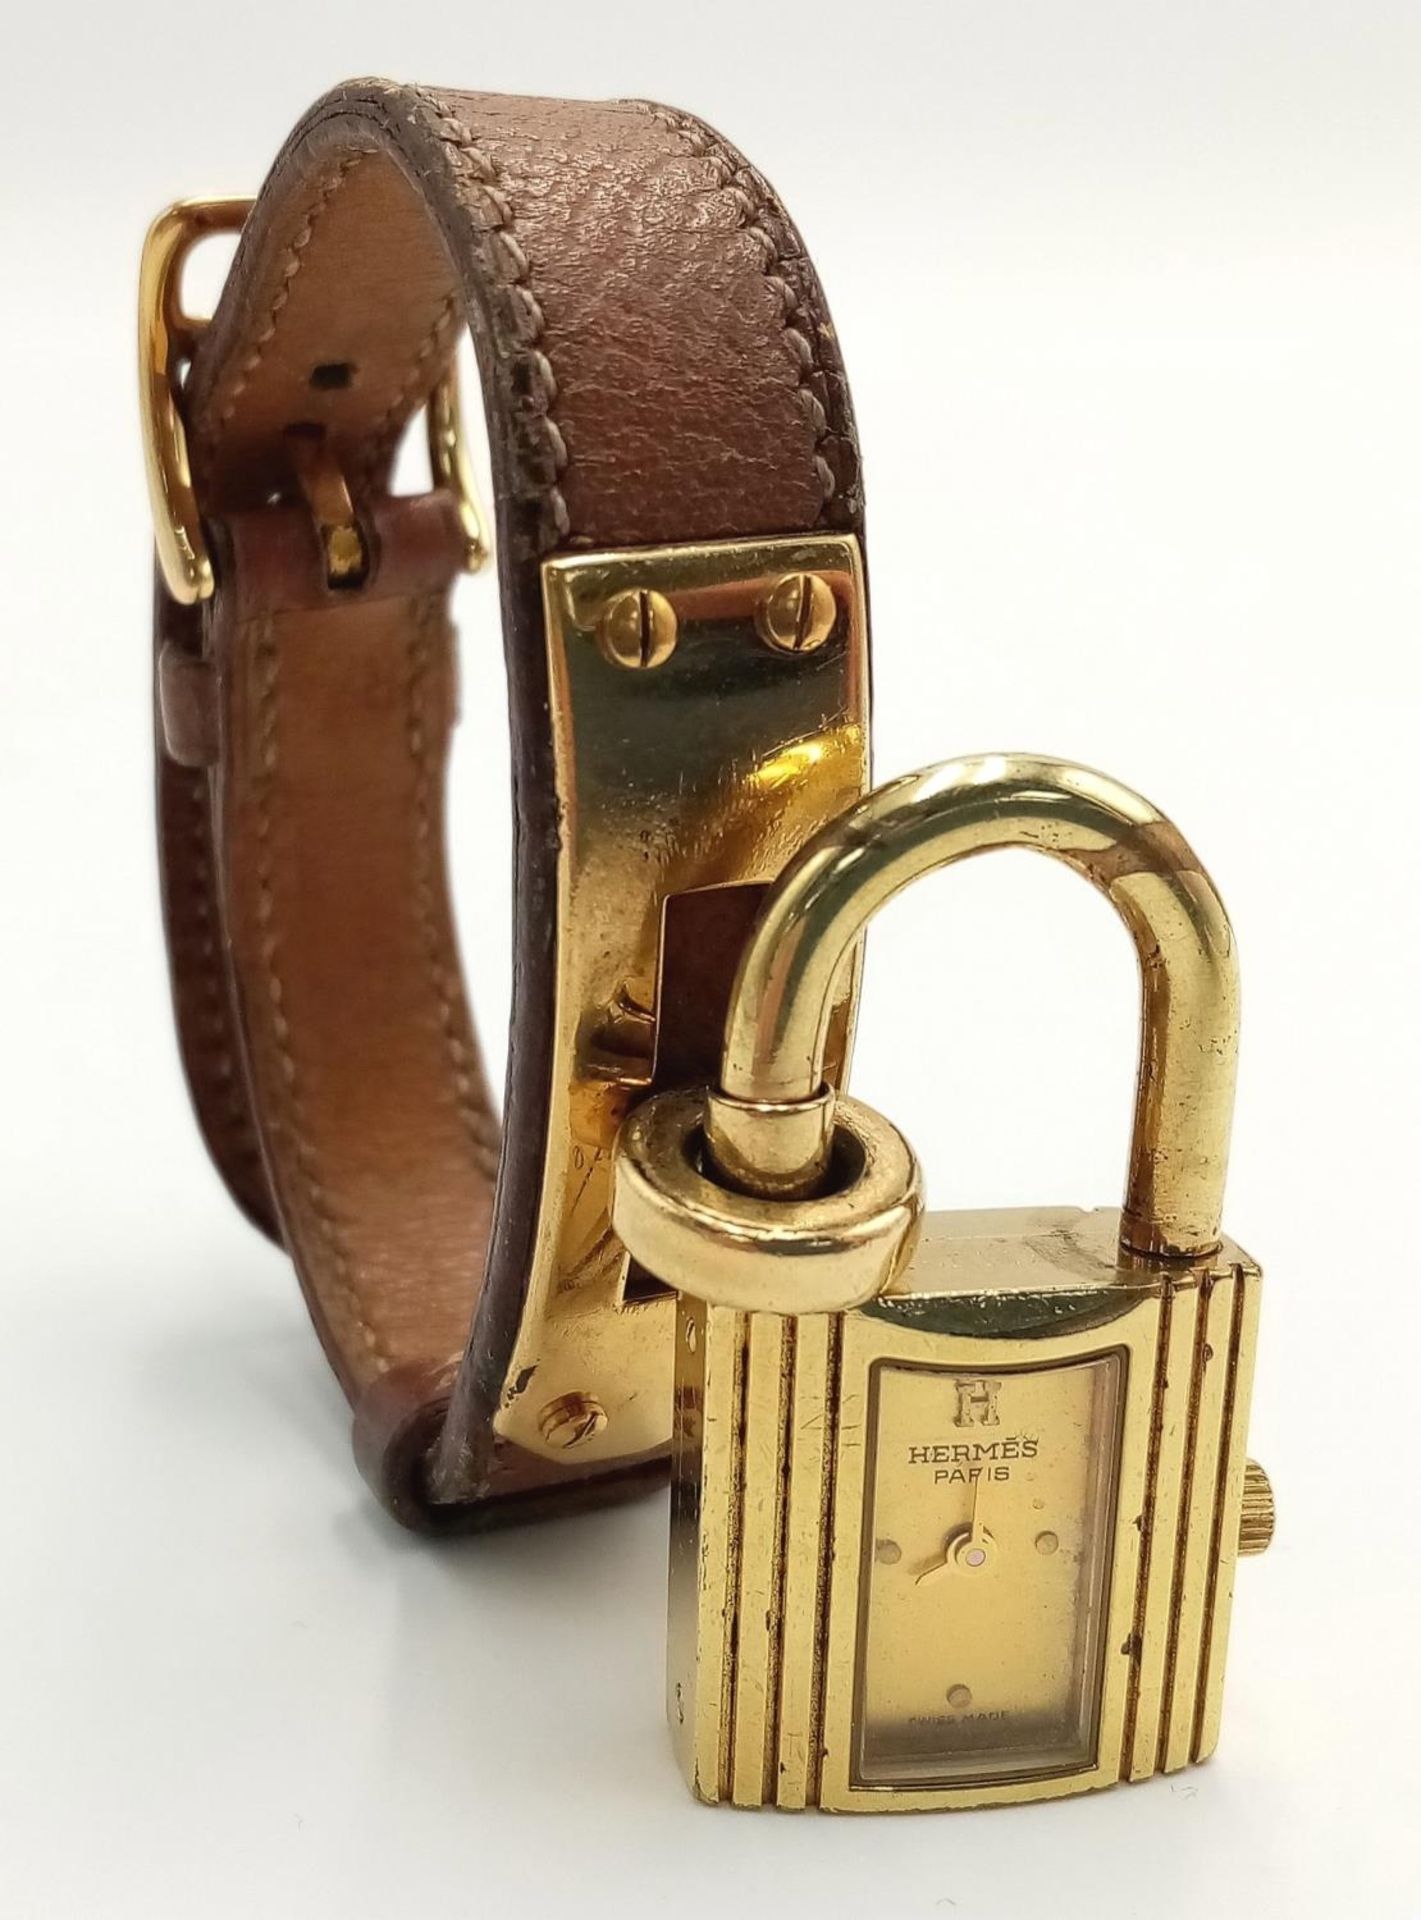 A Hermes Kelly Watch. Brown leather strap. Gold plated padlock quartz watch. Needs a battery so as